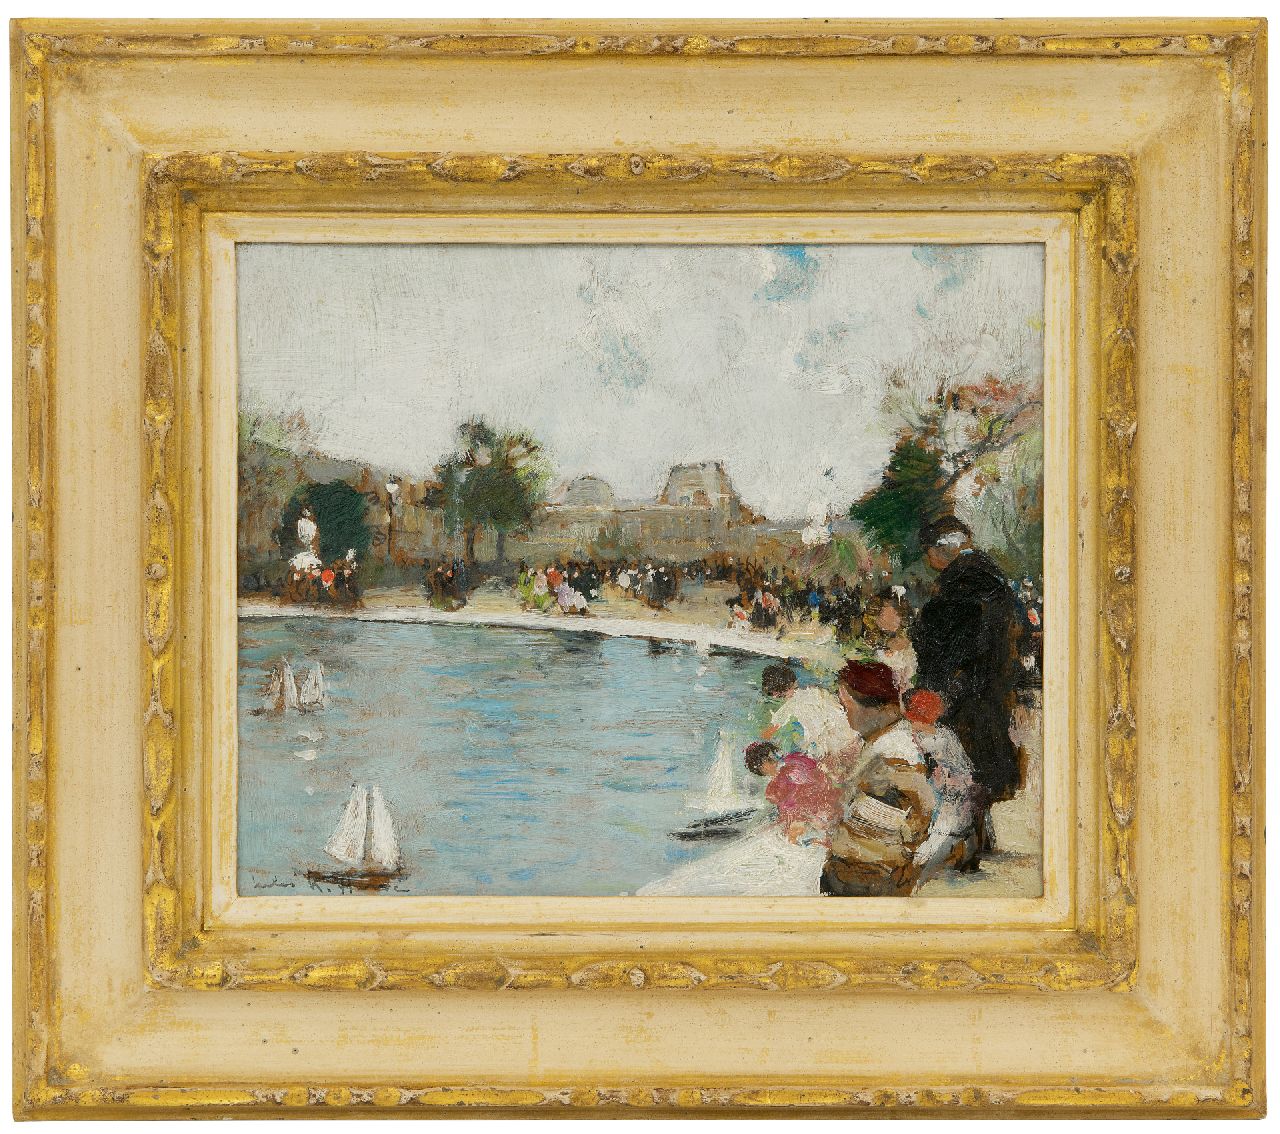 Hervé J.R.  | Jules René Hervé | Paintings offered for sale | The Garden of the Tuileries in Paris, oil on board 22.2 x 27.2 cm, signed l.l. and on the reverse